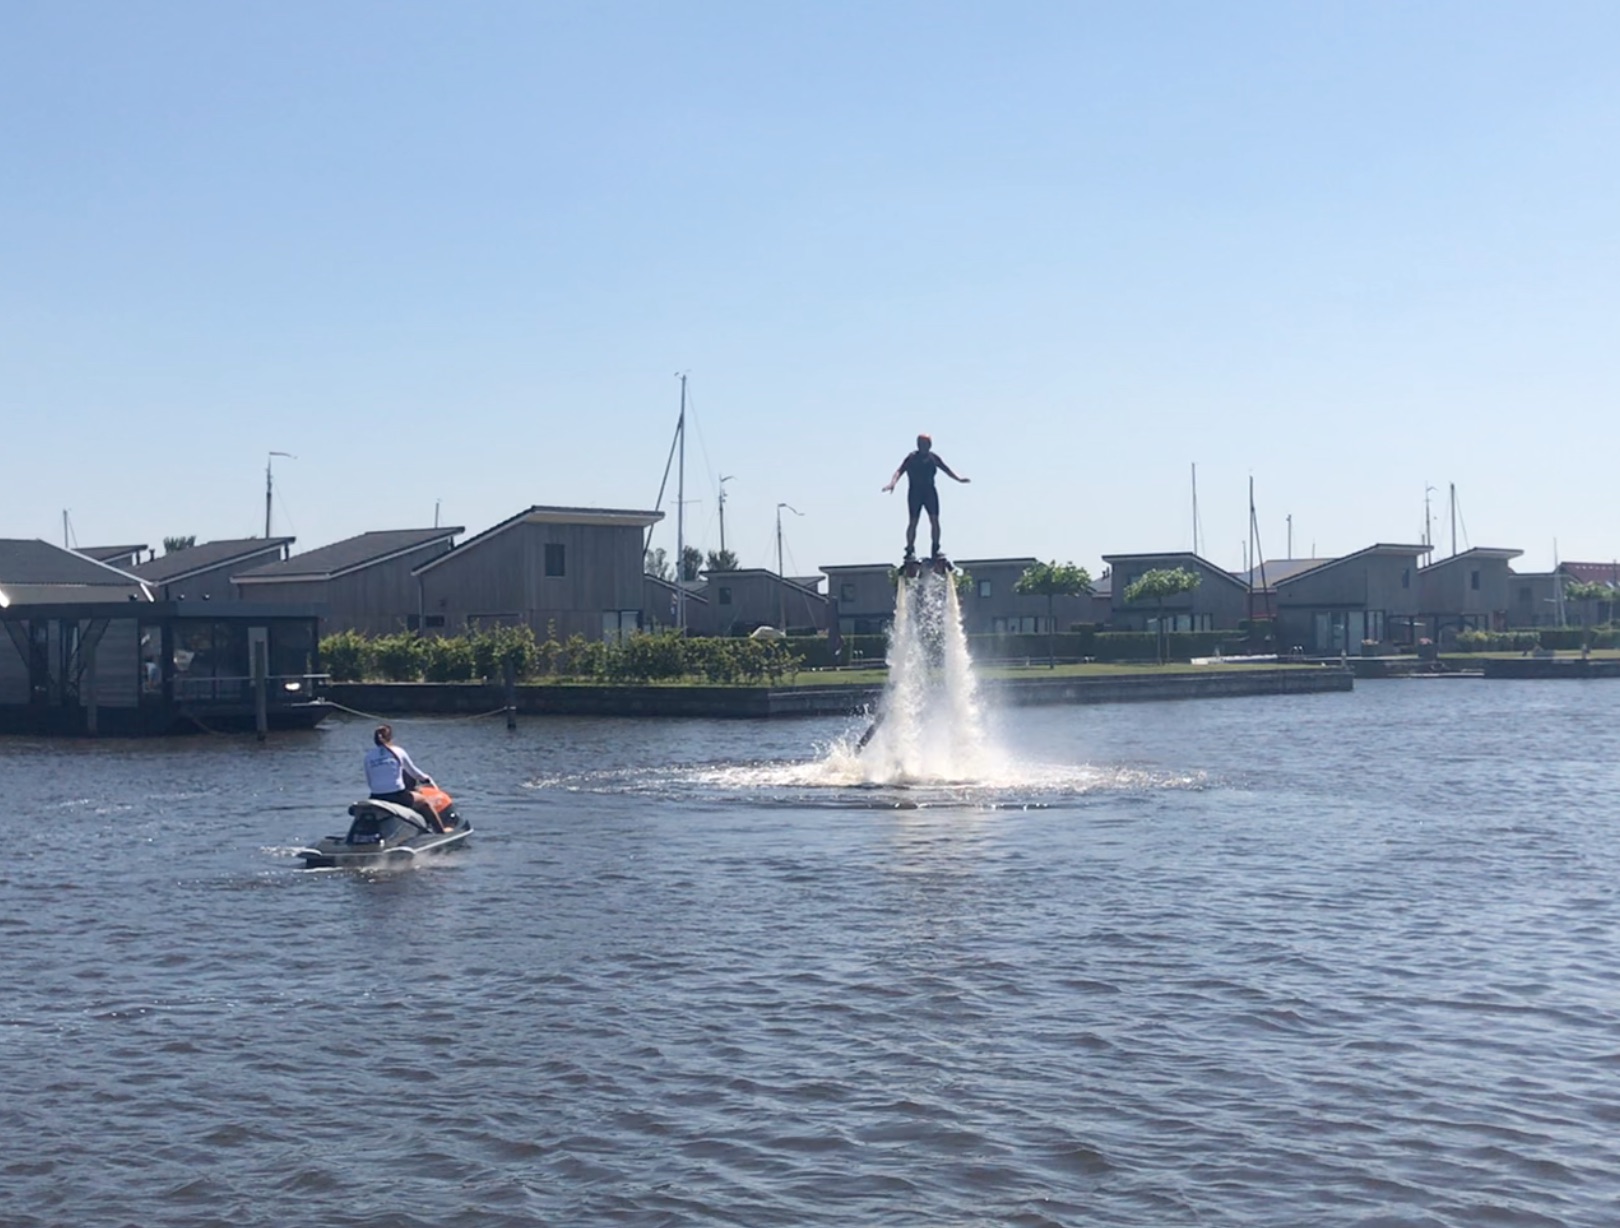 Flyboarding during the Luminis Amsterdam Social